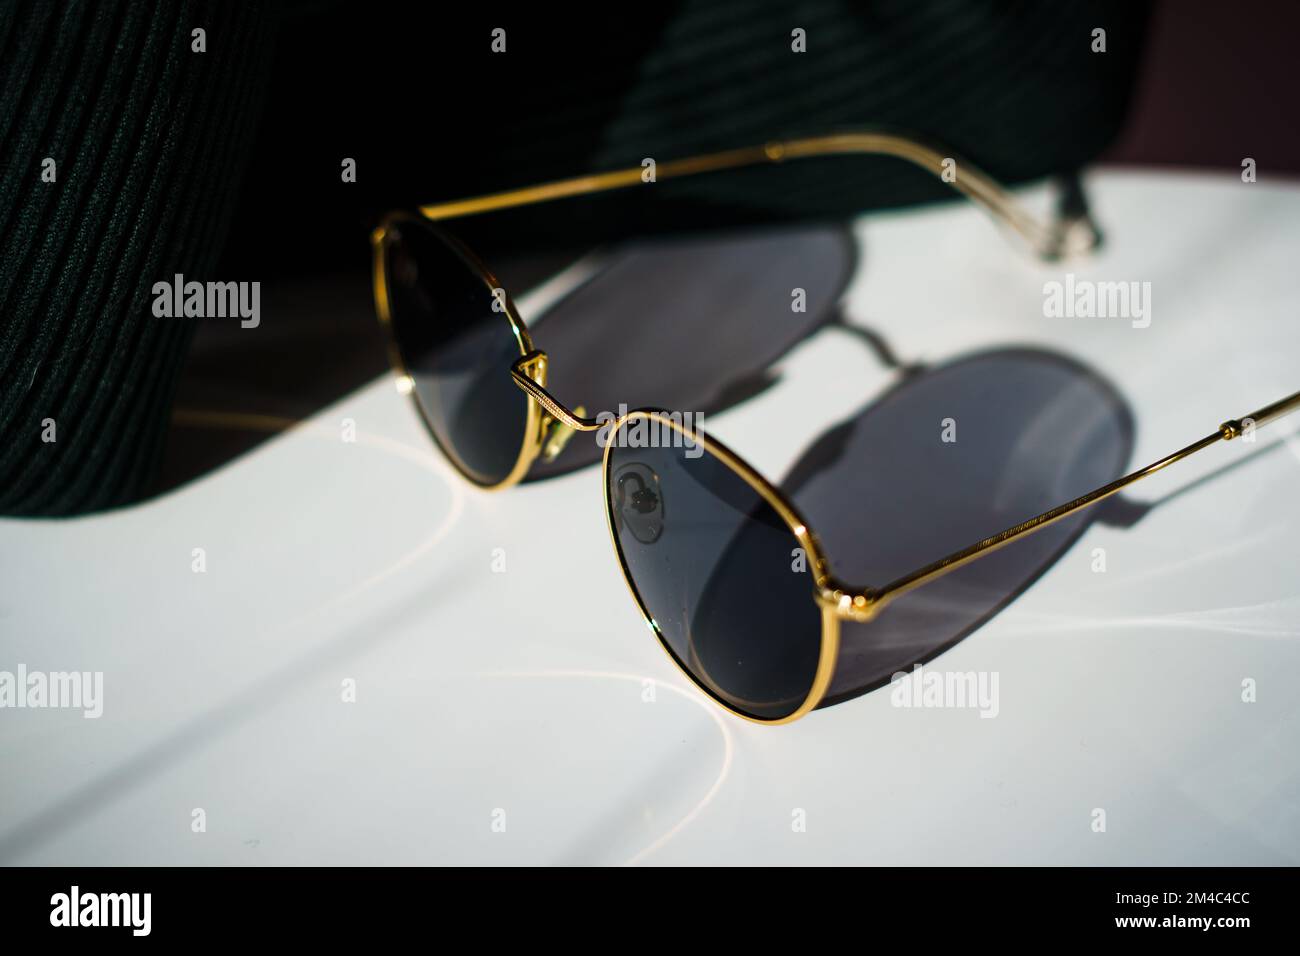 A closeup of Sunglasses with golden rim on a table dropping shadow Stock Photo